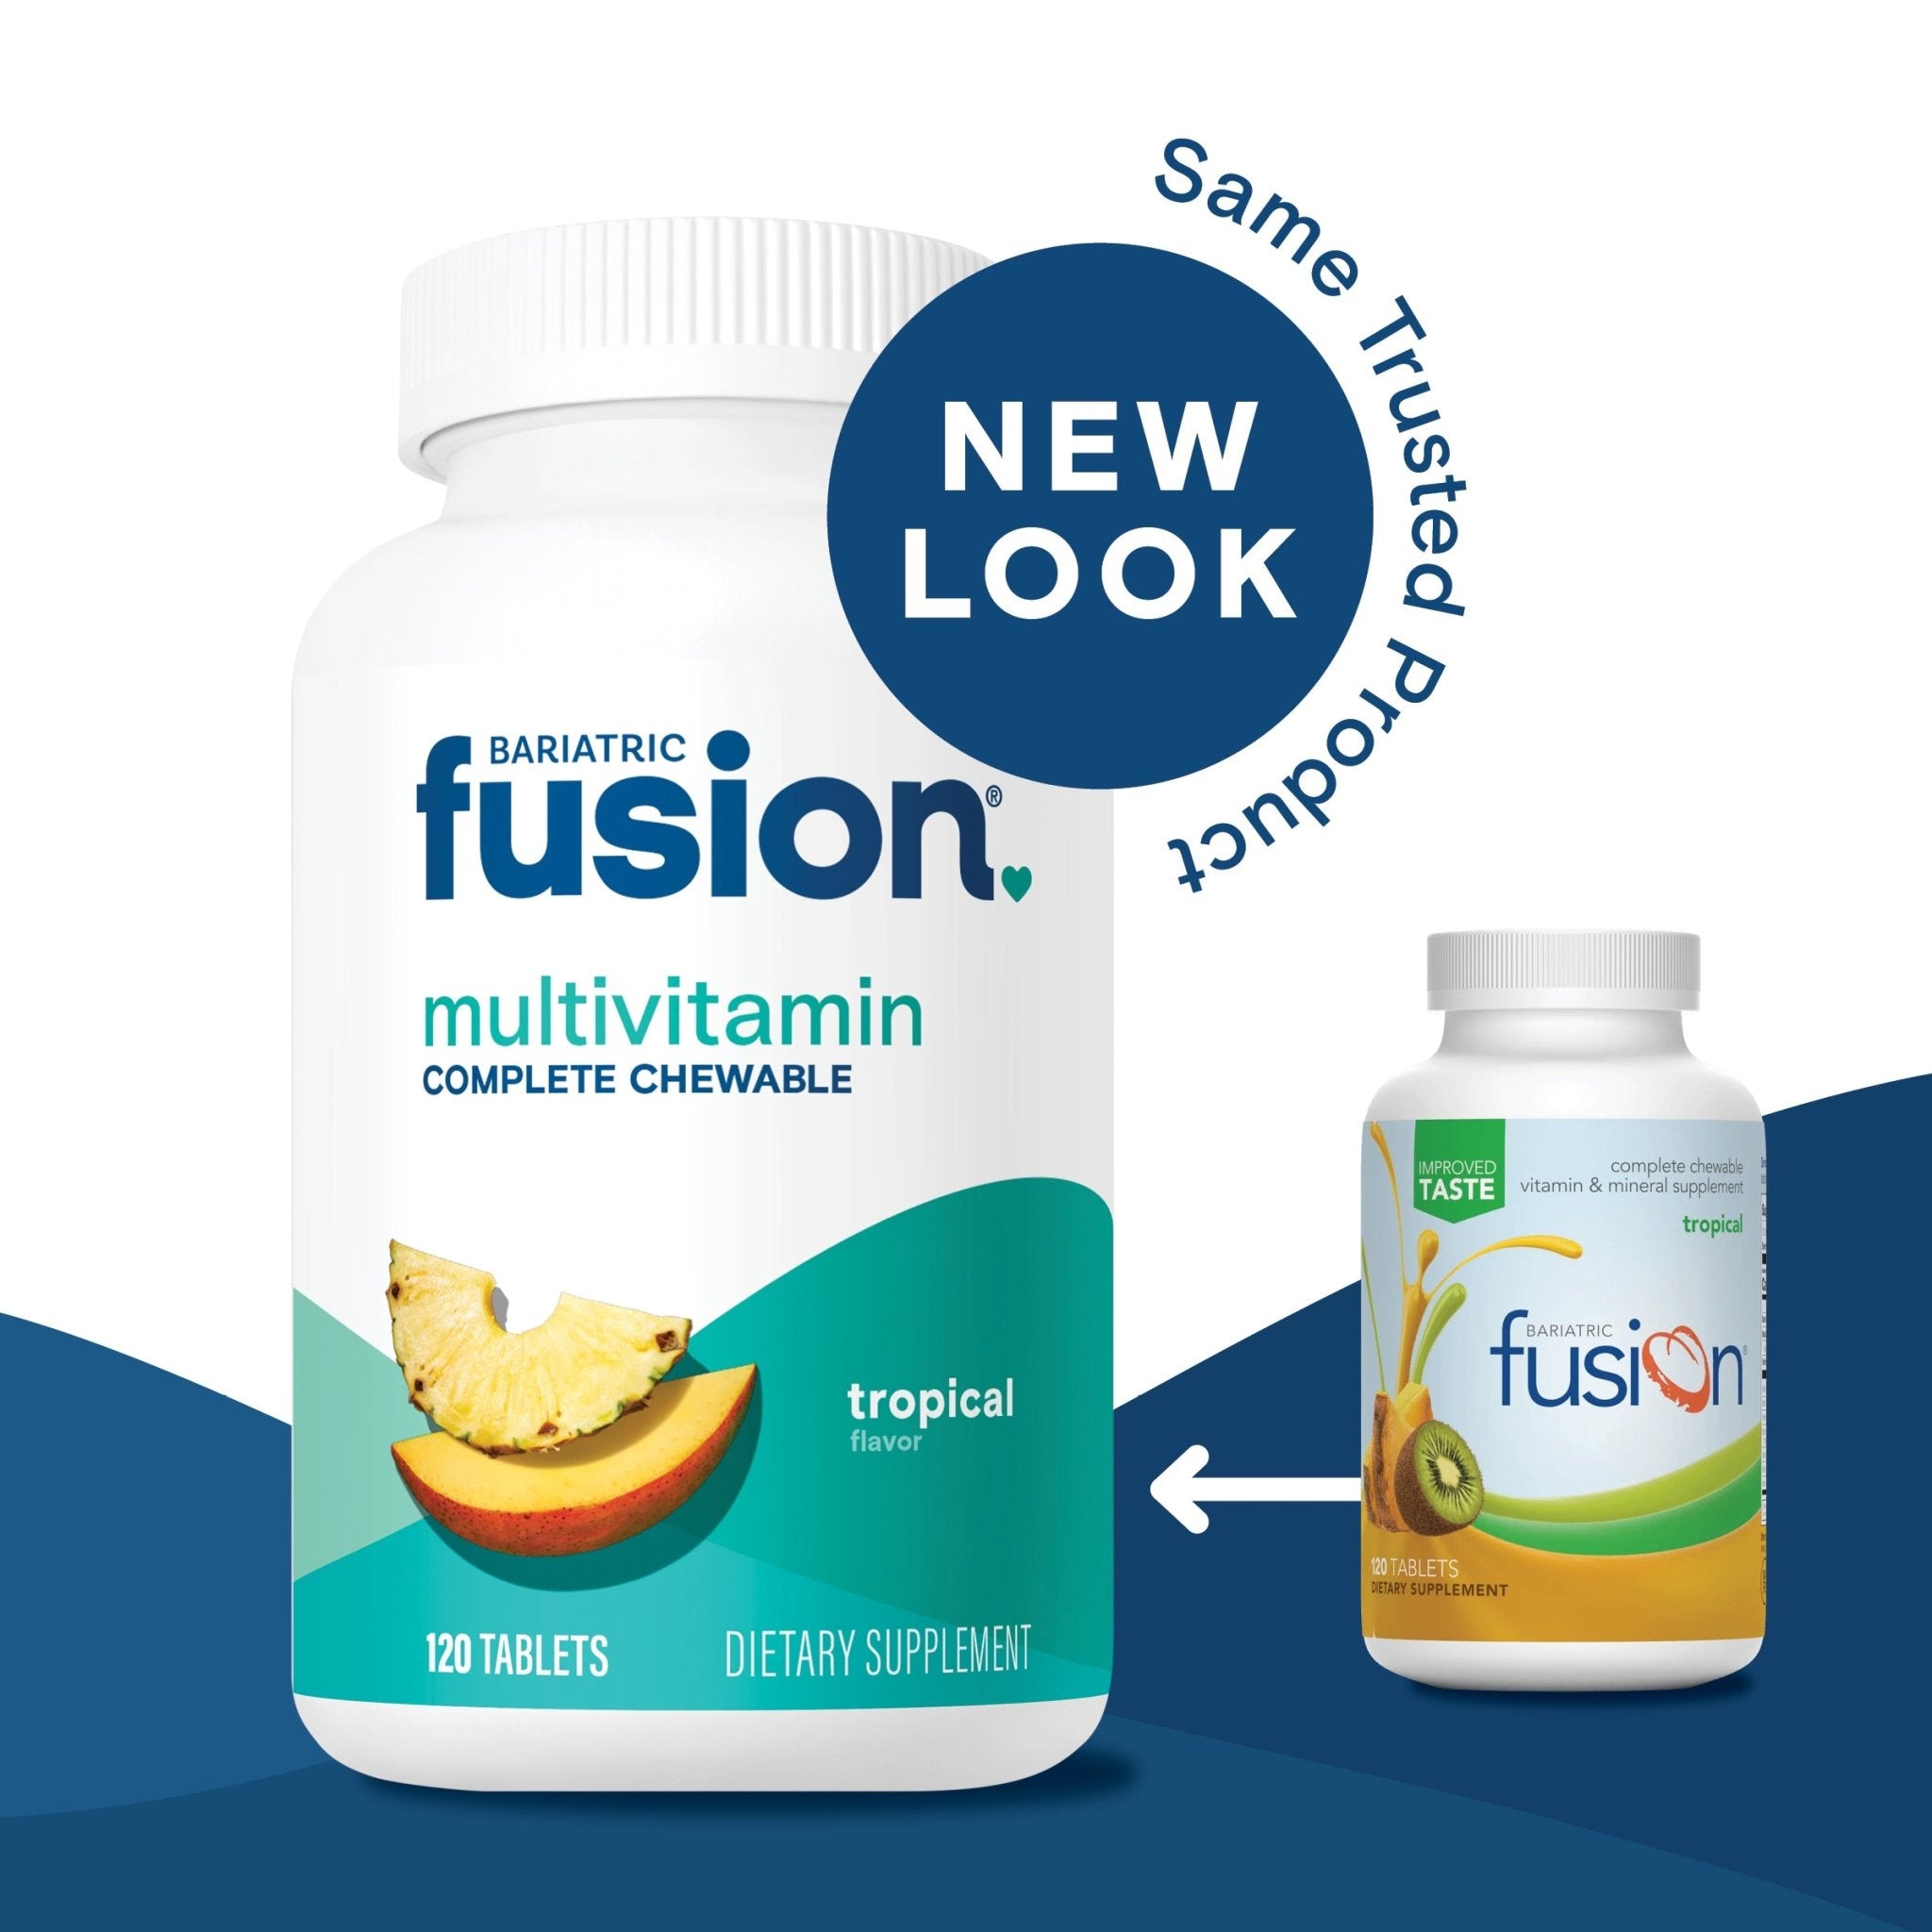 Tropical Complete Chewable Bariatric Multivitamin bundle new look, same trusted product.